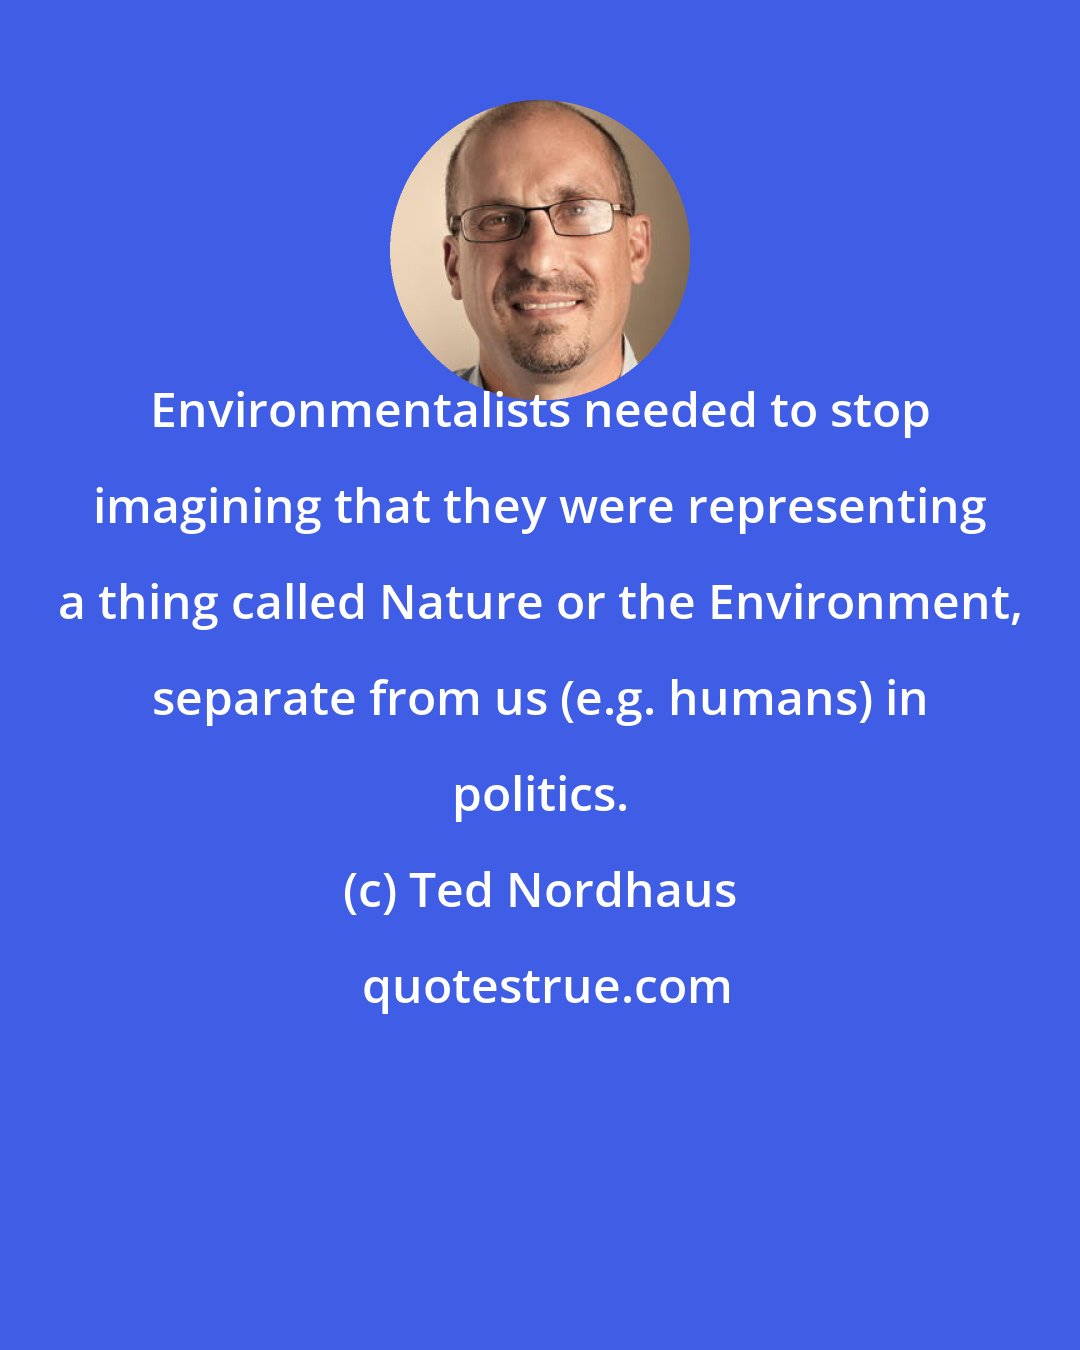 Ted Nordhaus: Environmentalists needed to stop imagining that they were representing a thing called Nature or the Environment, separate from us (e.g. humans) in politics.